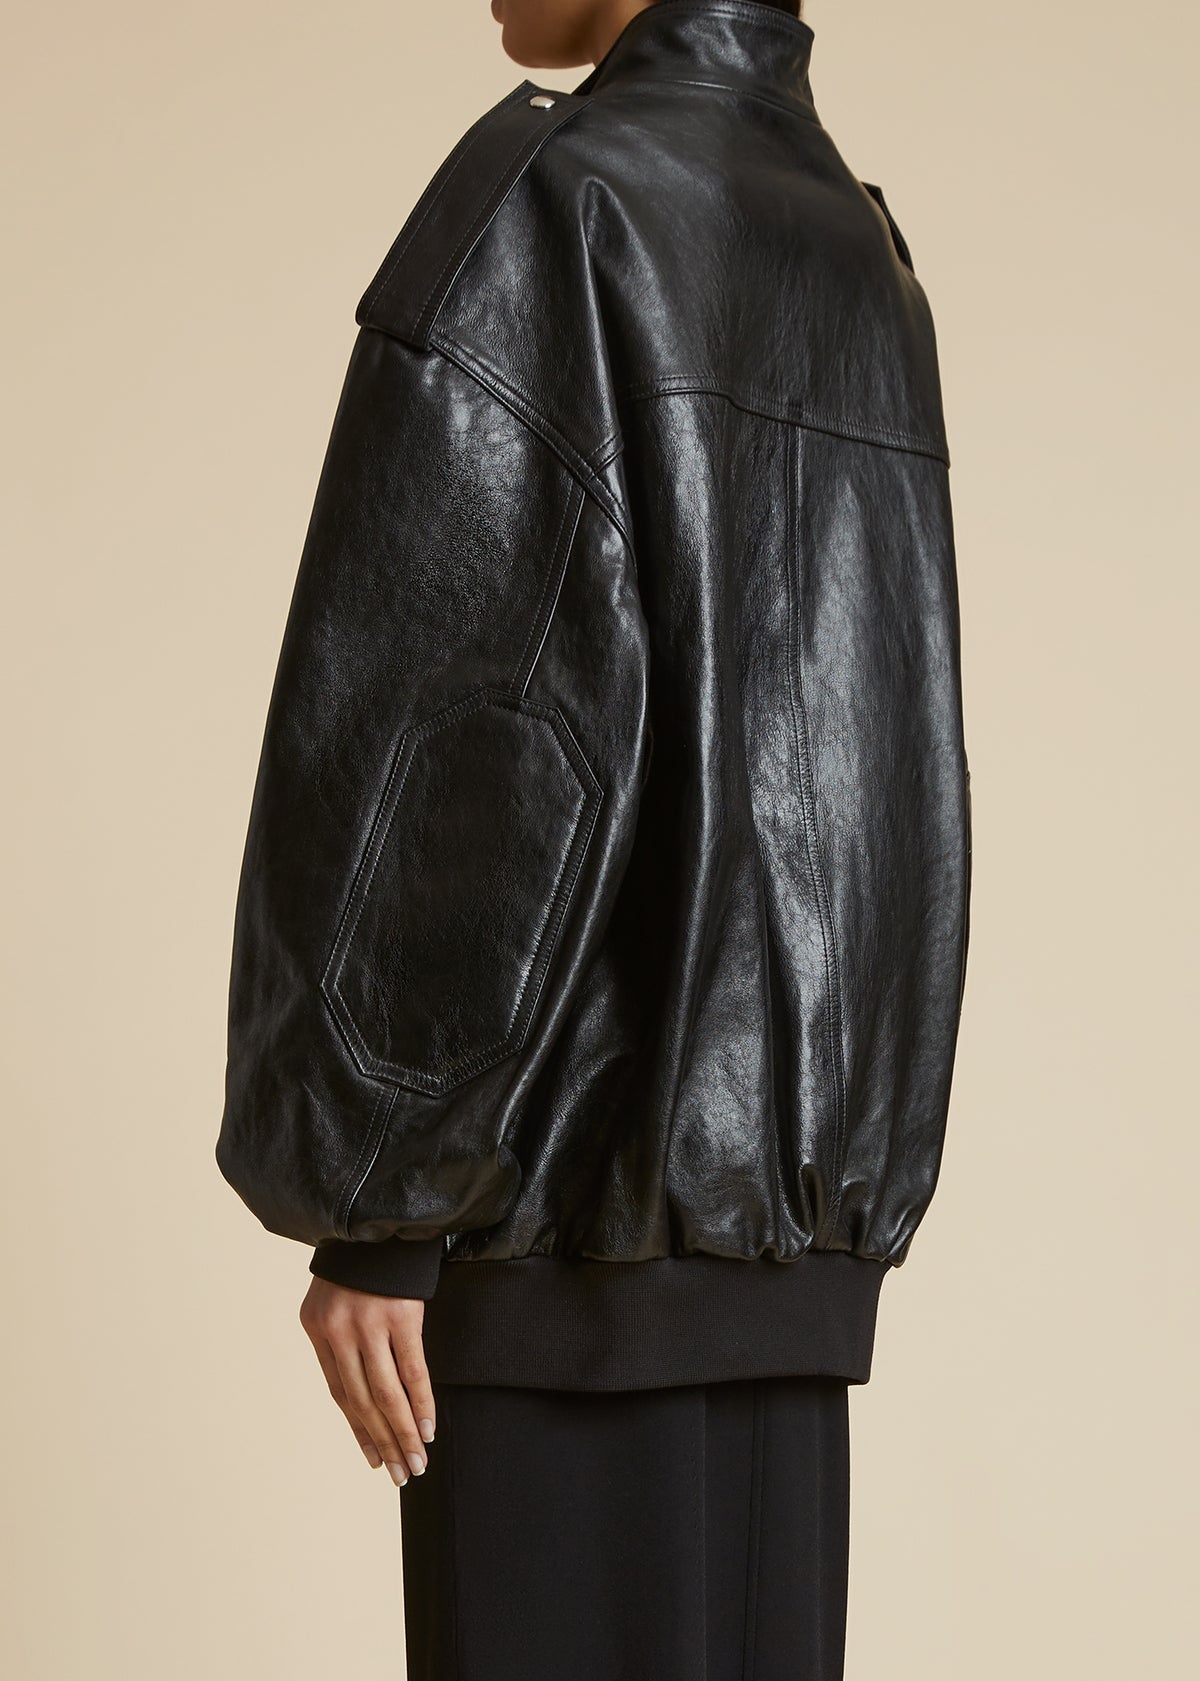 The Farris Jacket in Black Leather - 3